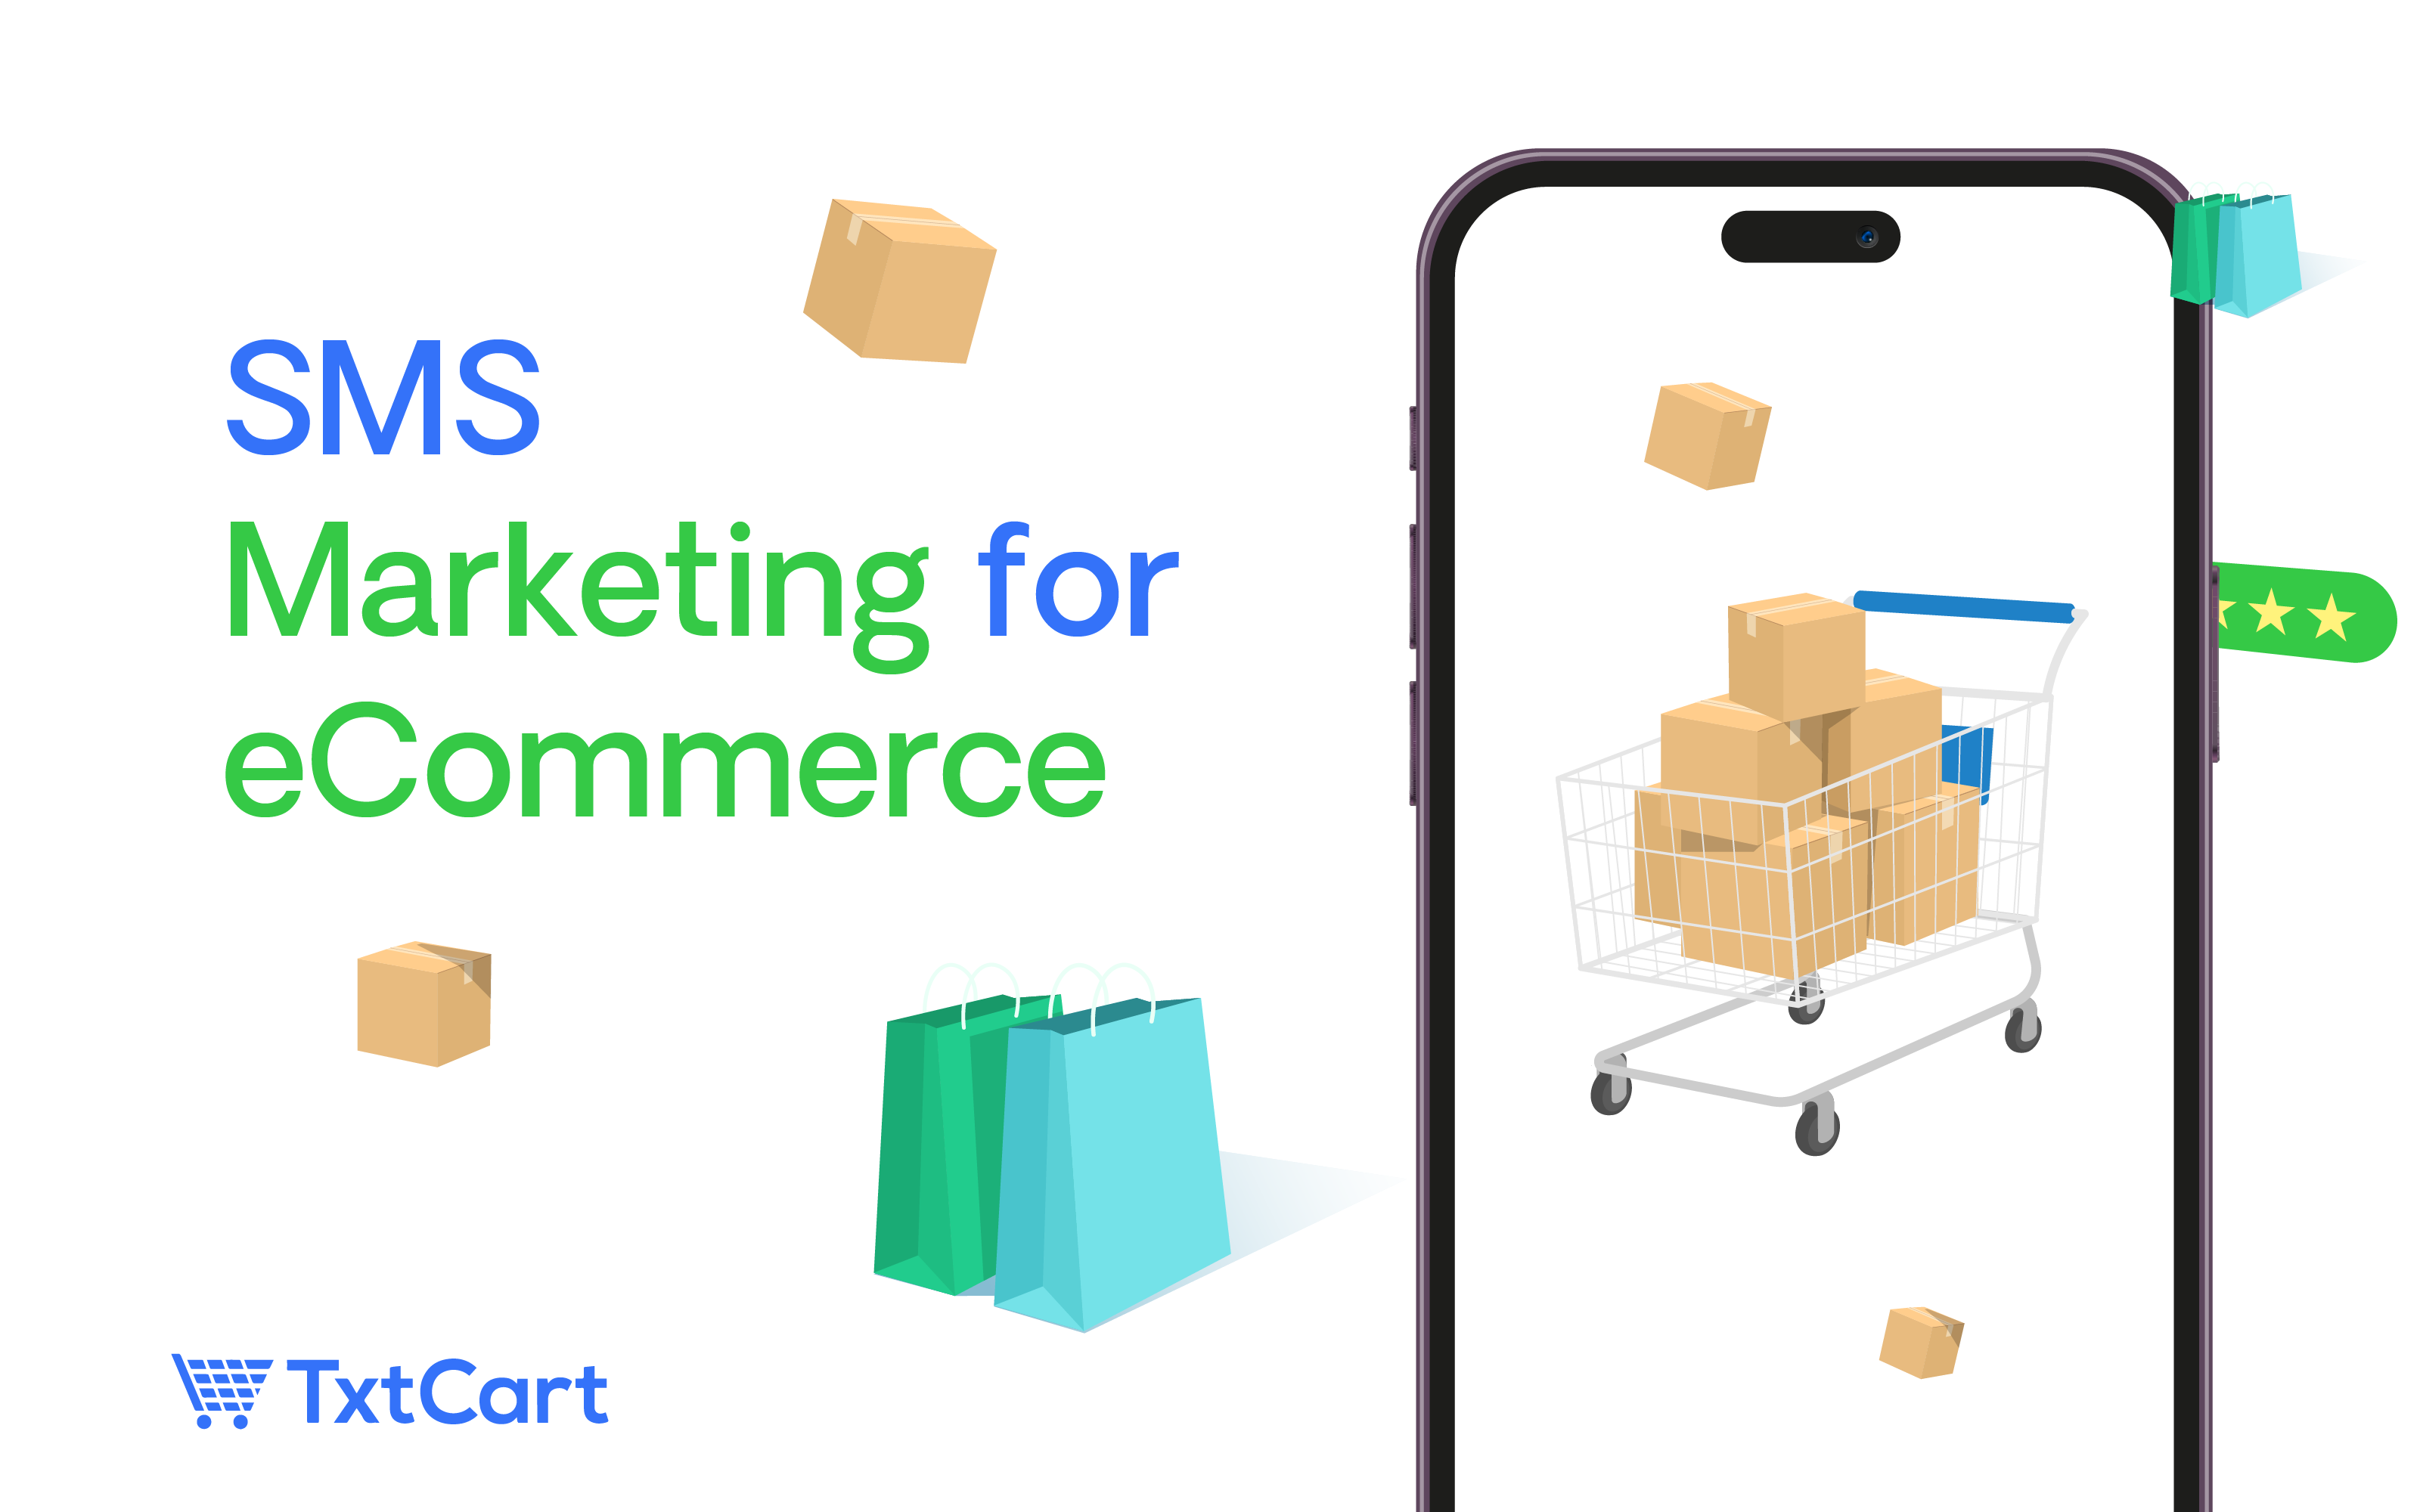 SMS Marketing for Ecommerce: Strategies, Tips and Examples